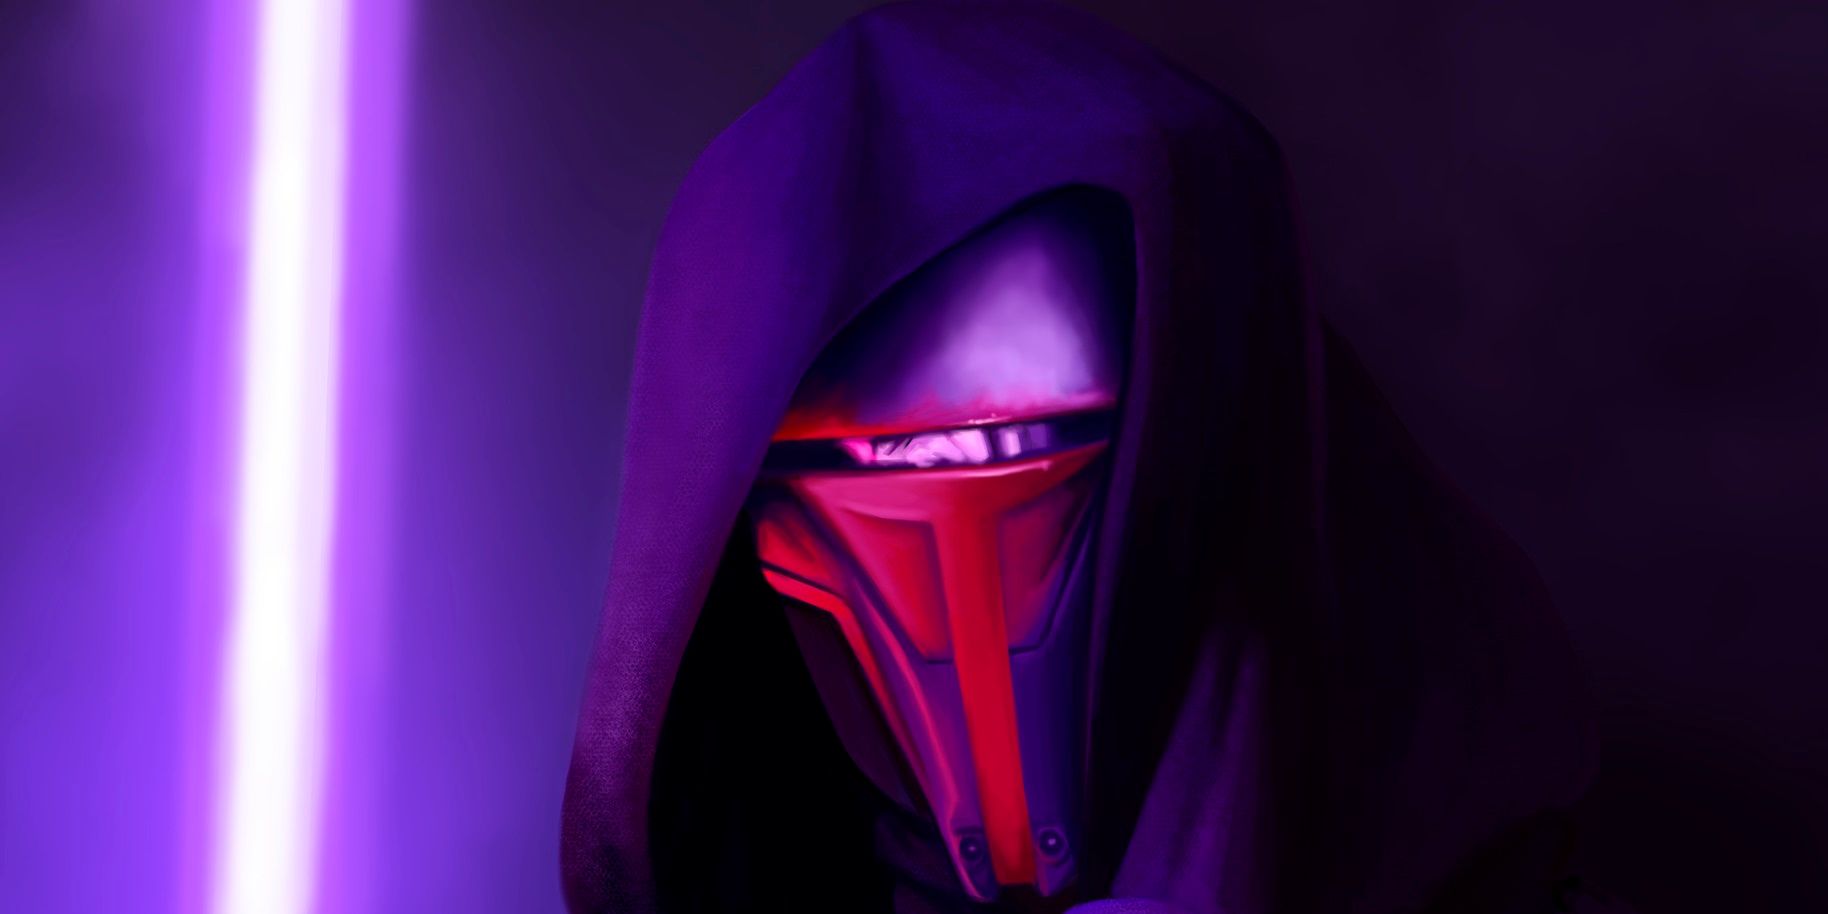 Revan was the Jedi who changed his alleigance to the Force the most.